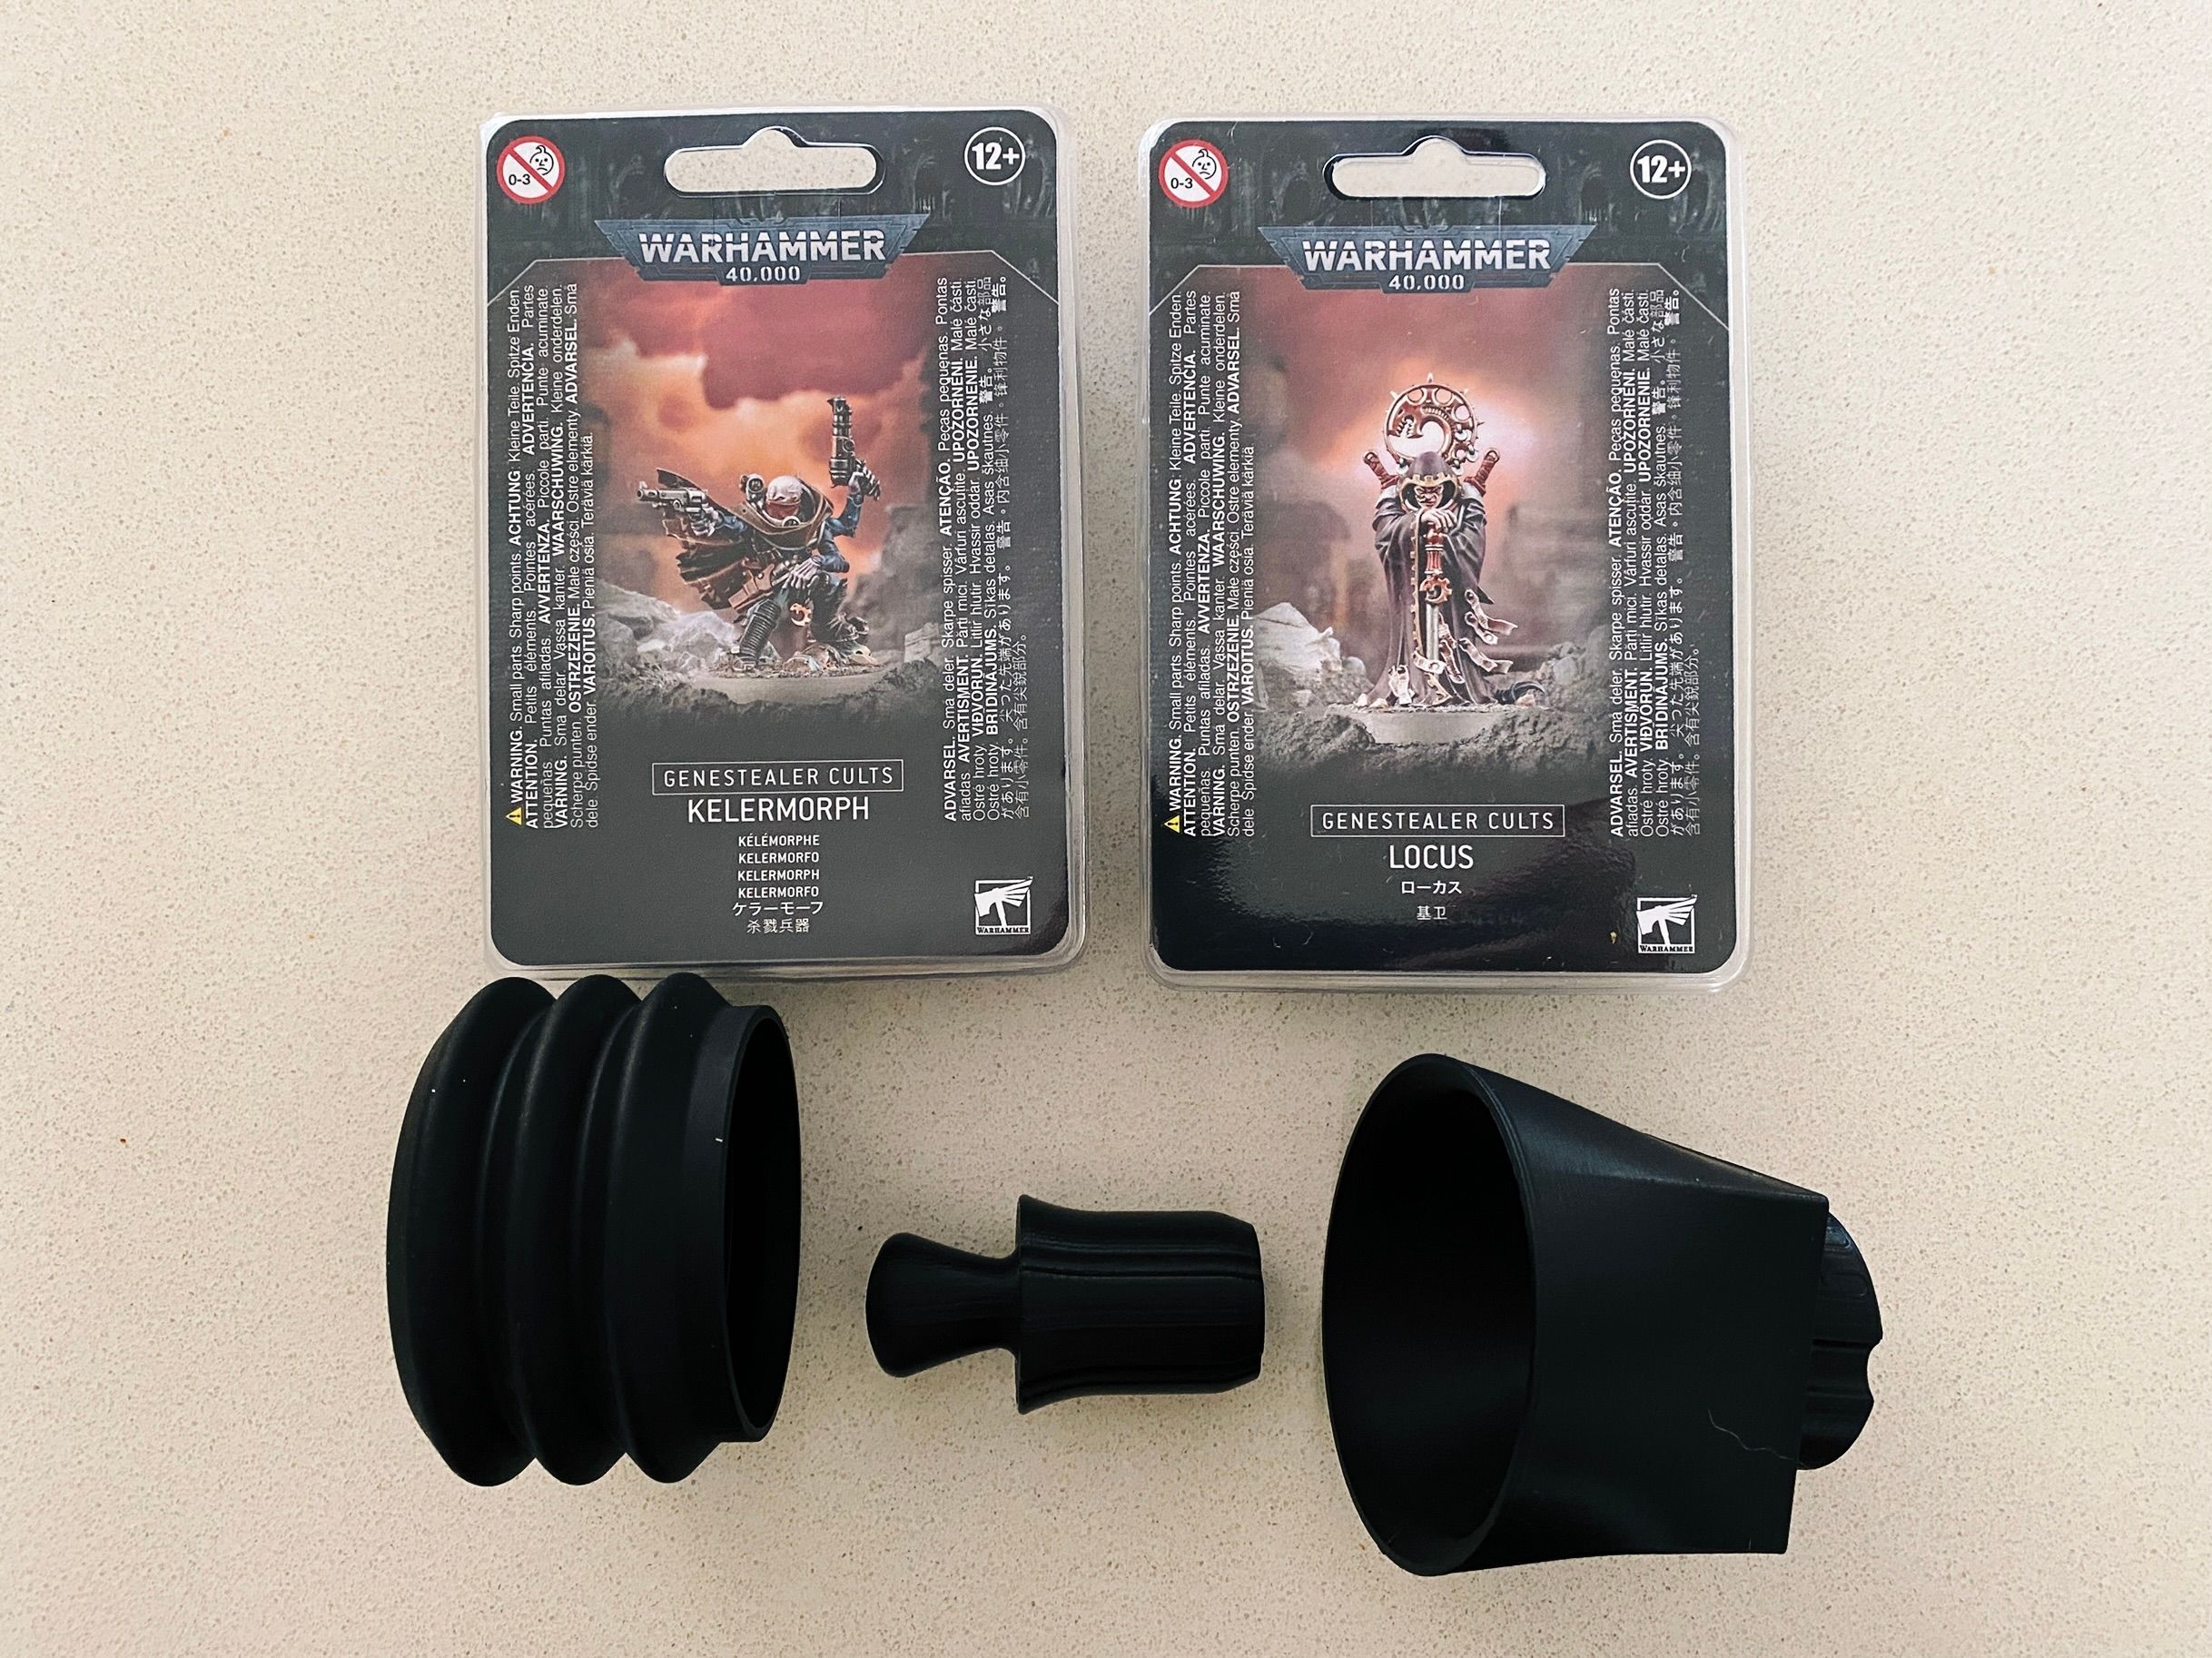 A photo of the boxes of two Warhammer 40,000 miniatures, both are freaky-looking human/alien hybrids (one looks like a gunslinger and the other is standing there looking menacing). Underneath those are three plastic things: a little bellow, a funnel-looking thing, and a small weight.